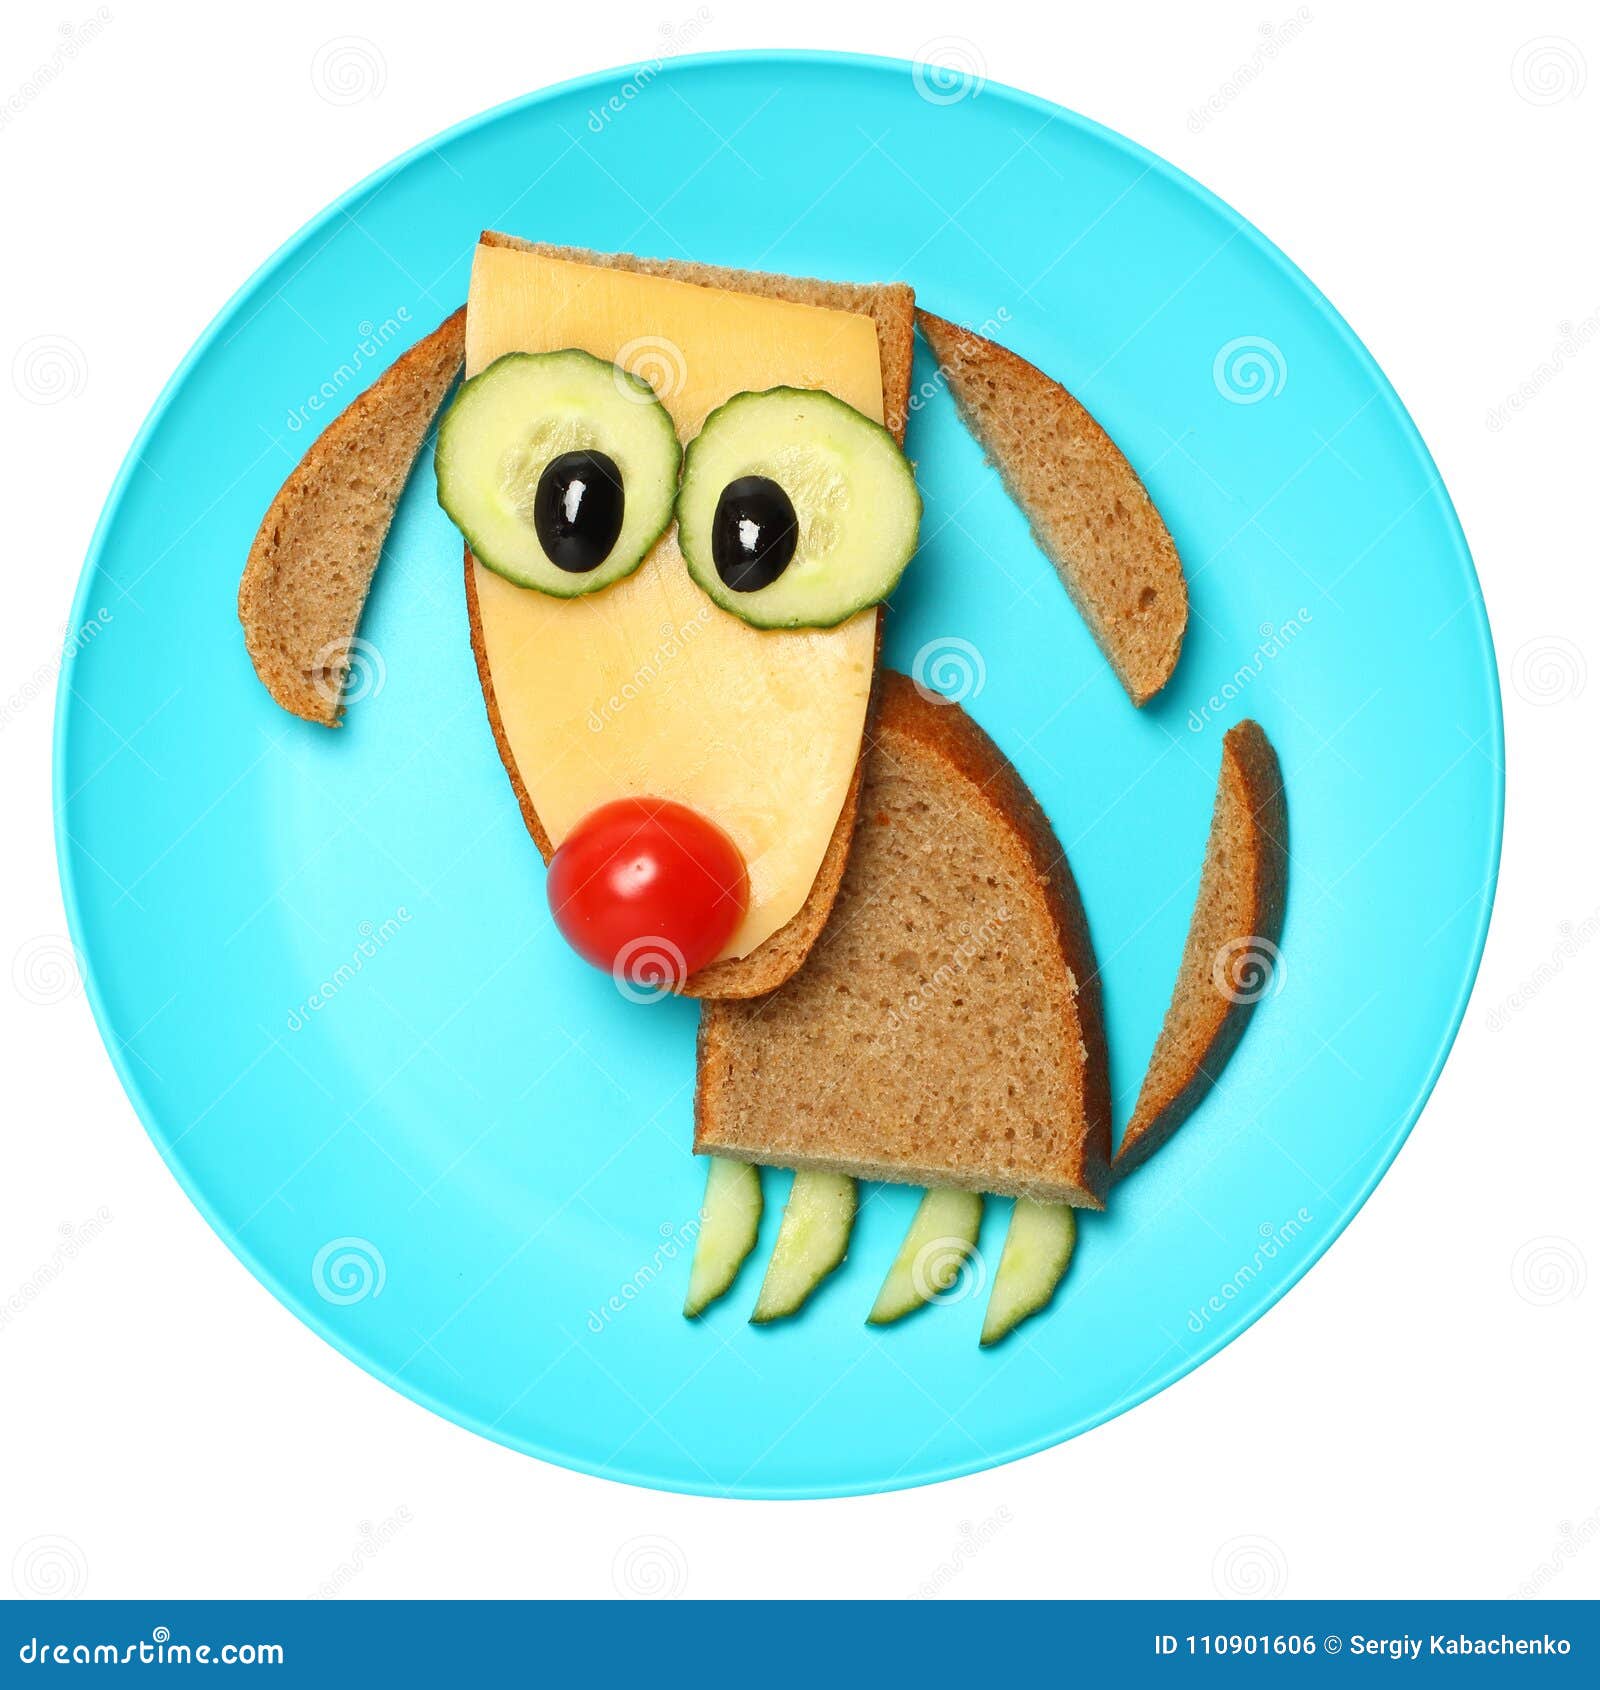 Dog Made As Sandwich on Blue Plate Stock Photo - Image of form ...